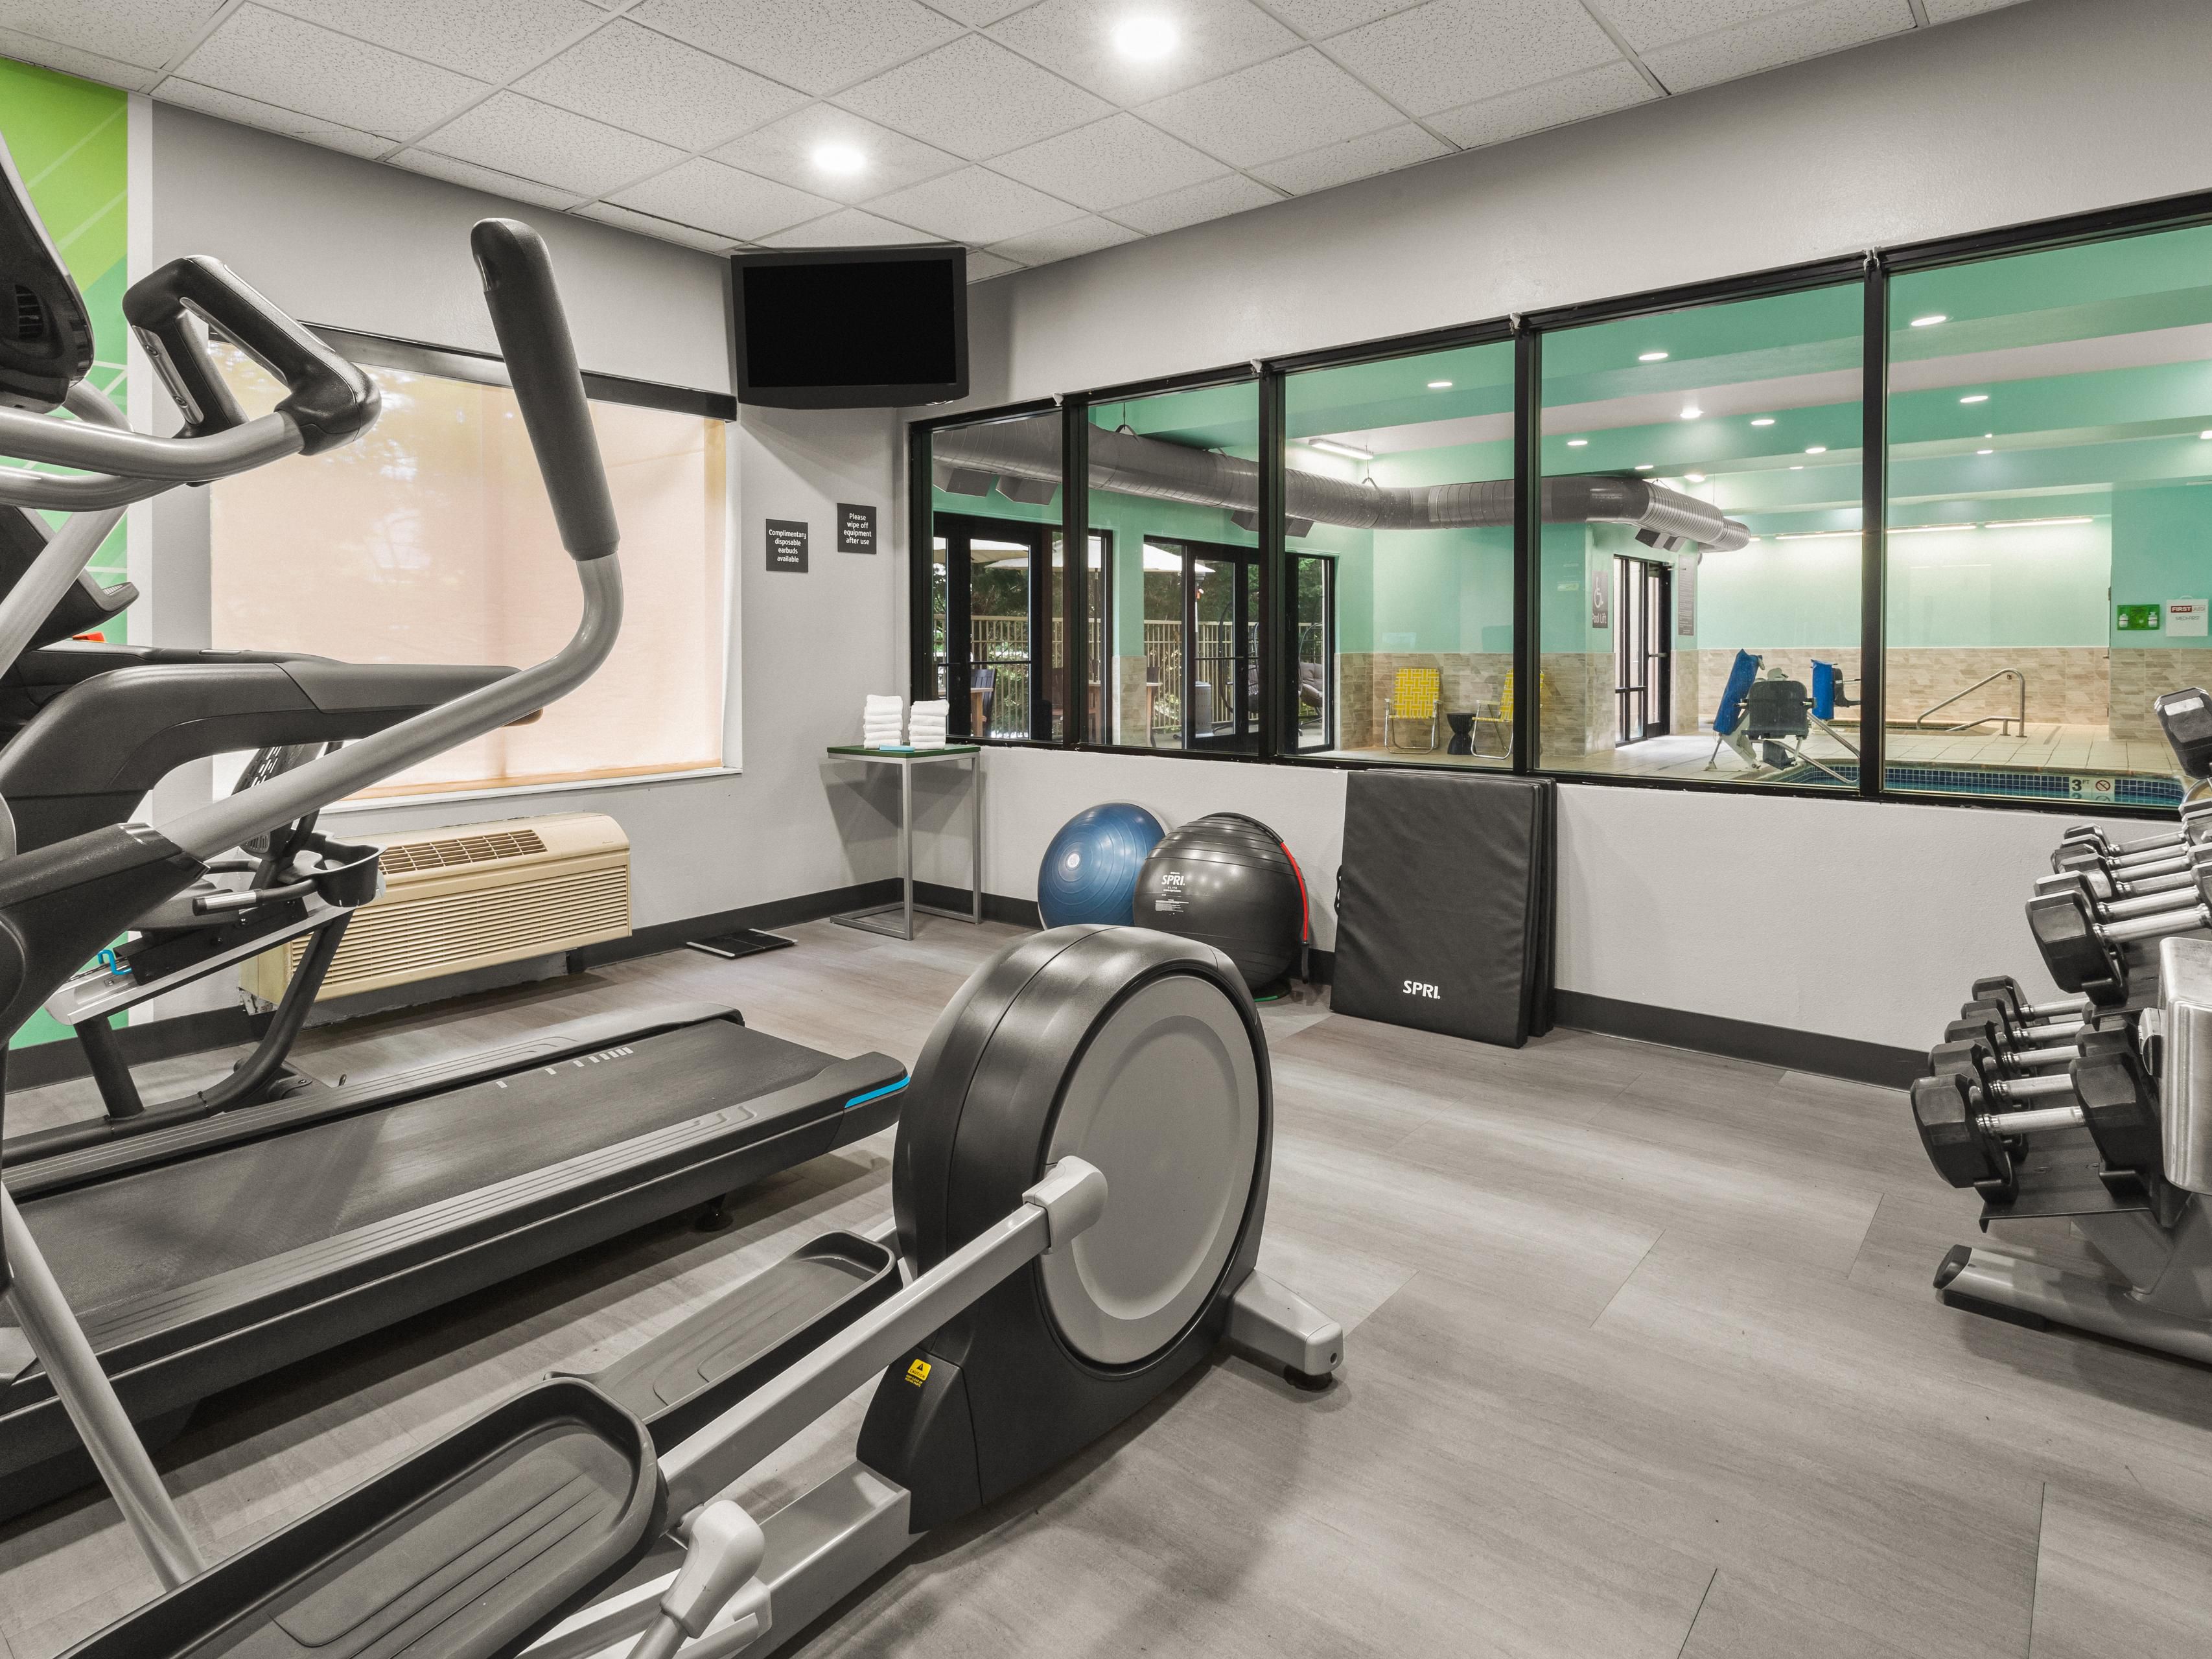 Catch a workout in our 24-hour Fitness Center. Complete with elliptical, free weights, bike, and treadmill.